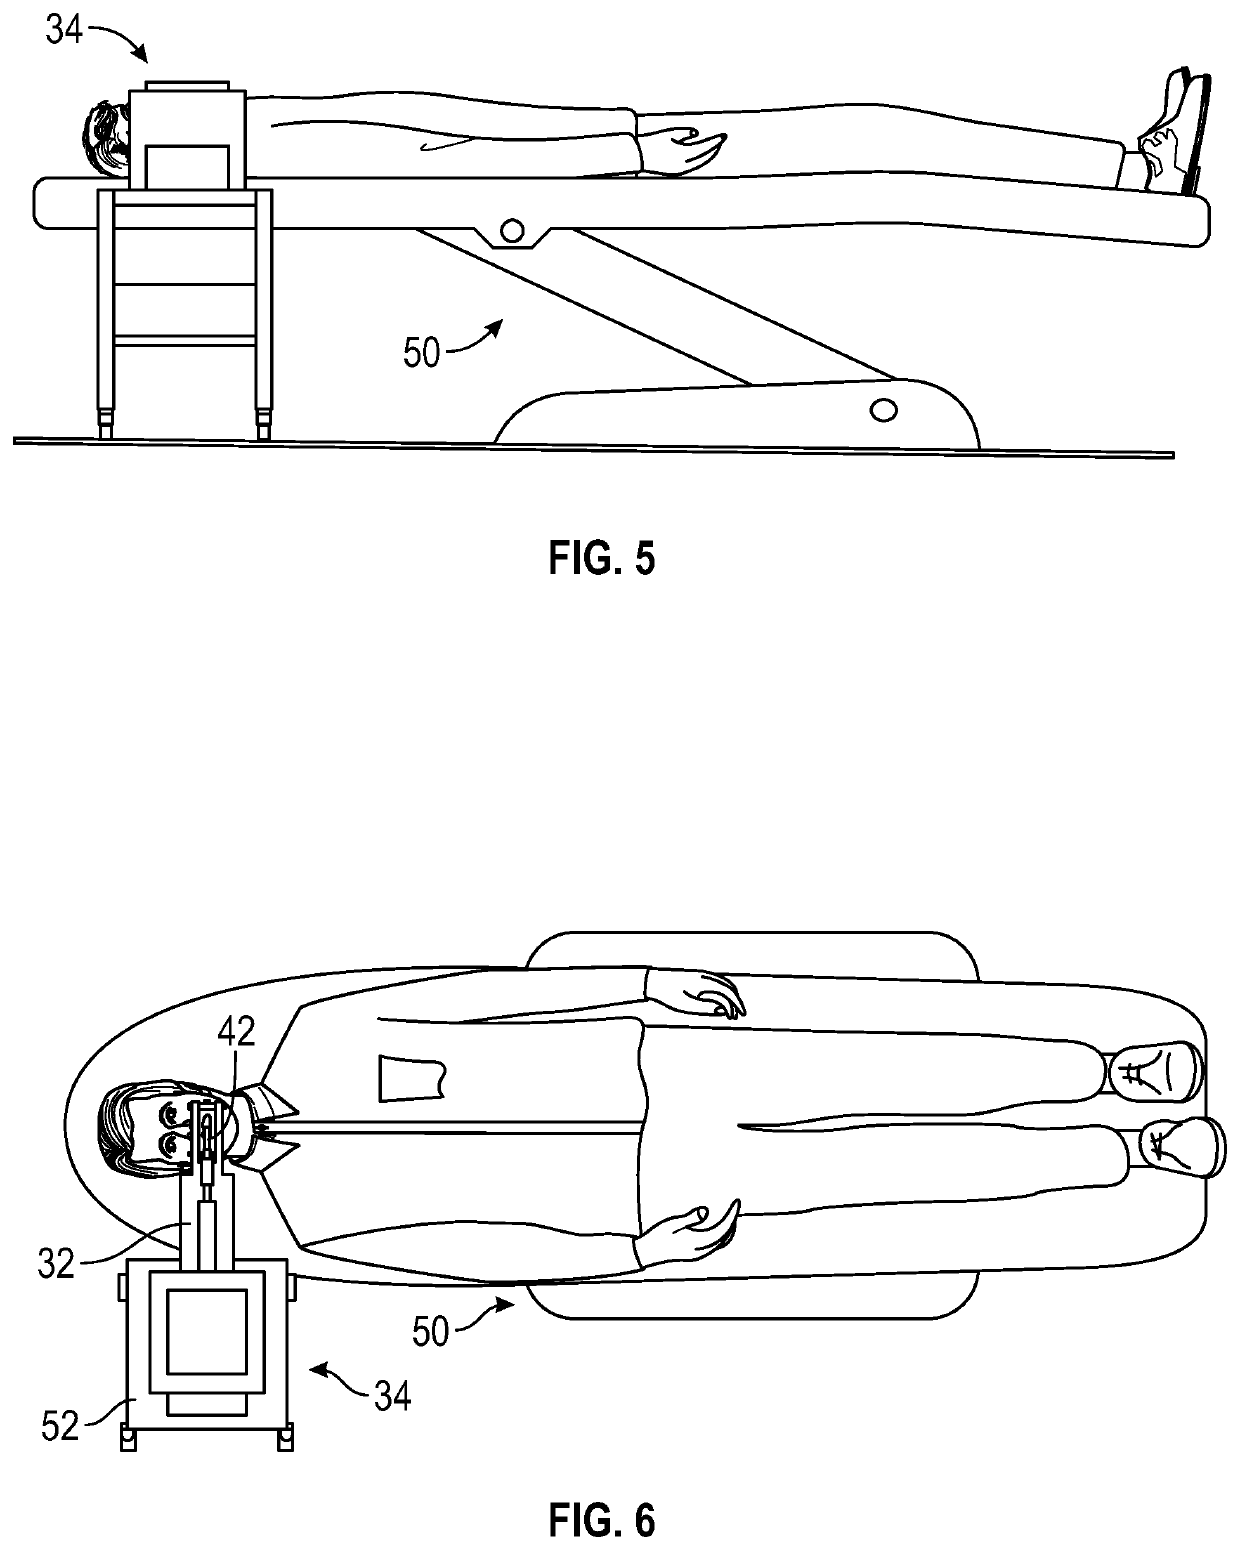 Apparatus for in situ restoration of unconstrained dental structure